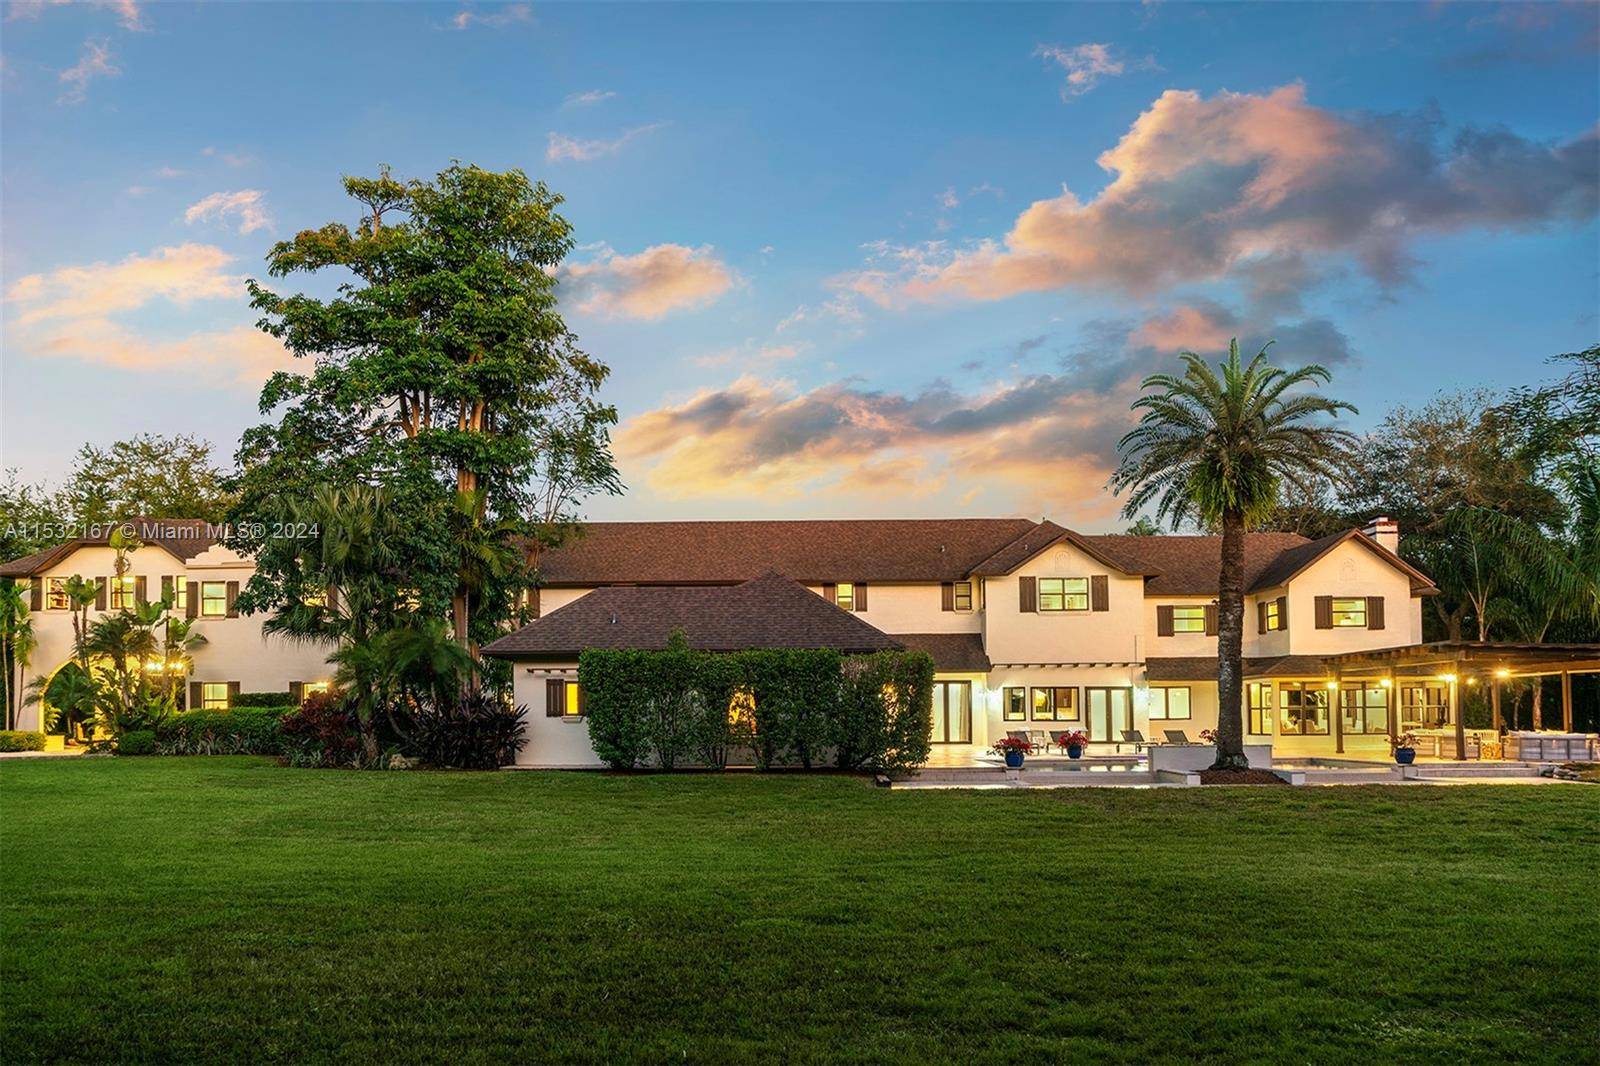 Nestled in Pinecrest, this traditional charm w modern updates estate graces a stunning 1.